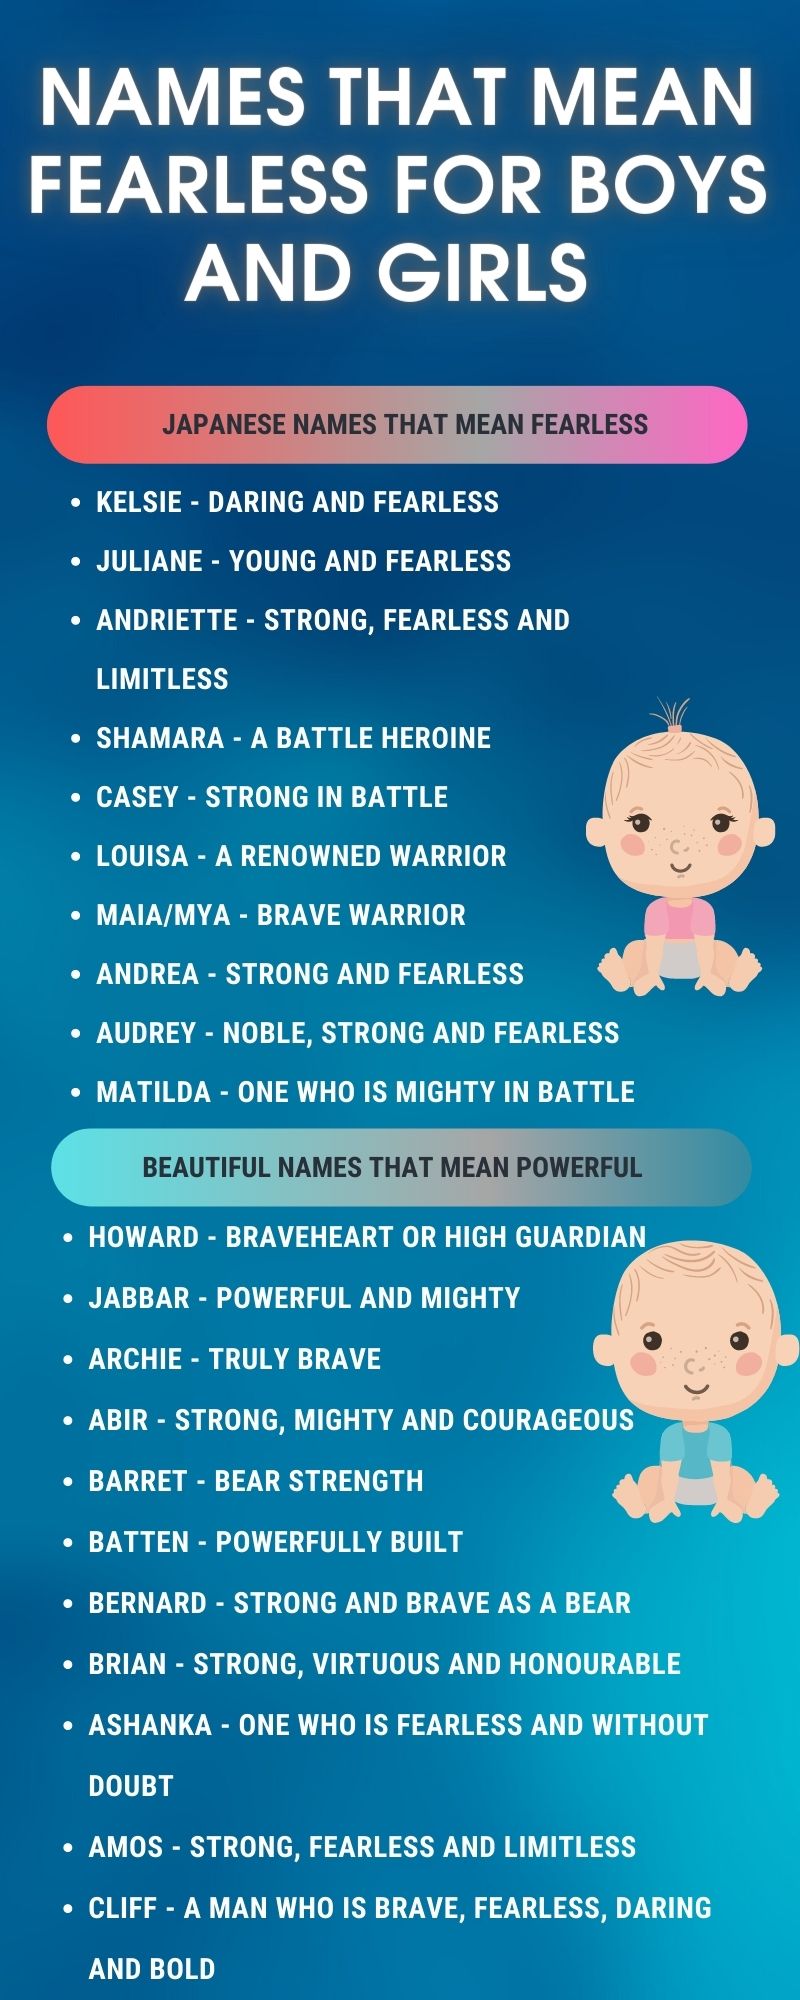 Names that mean fearless